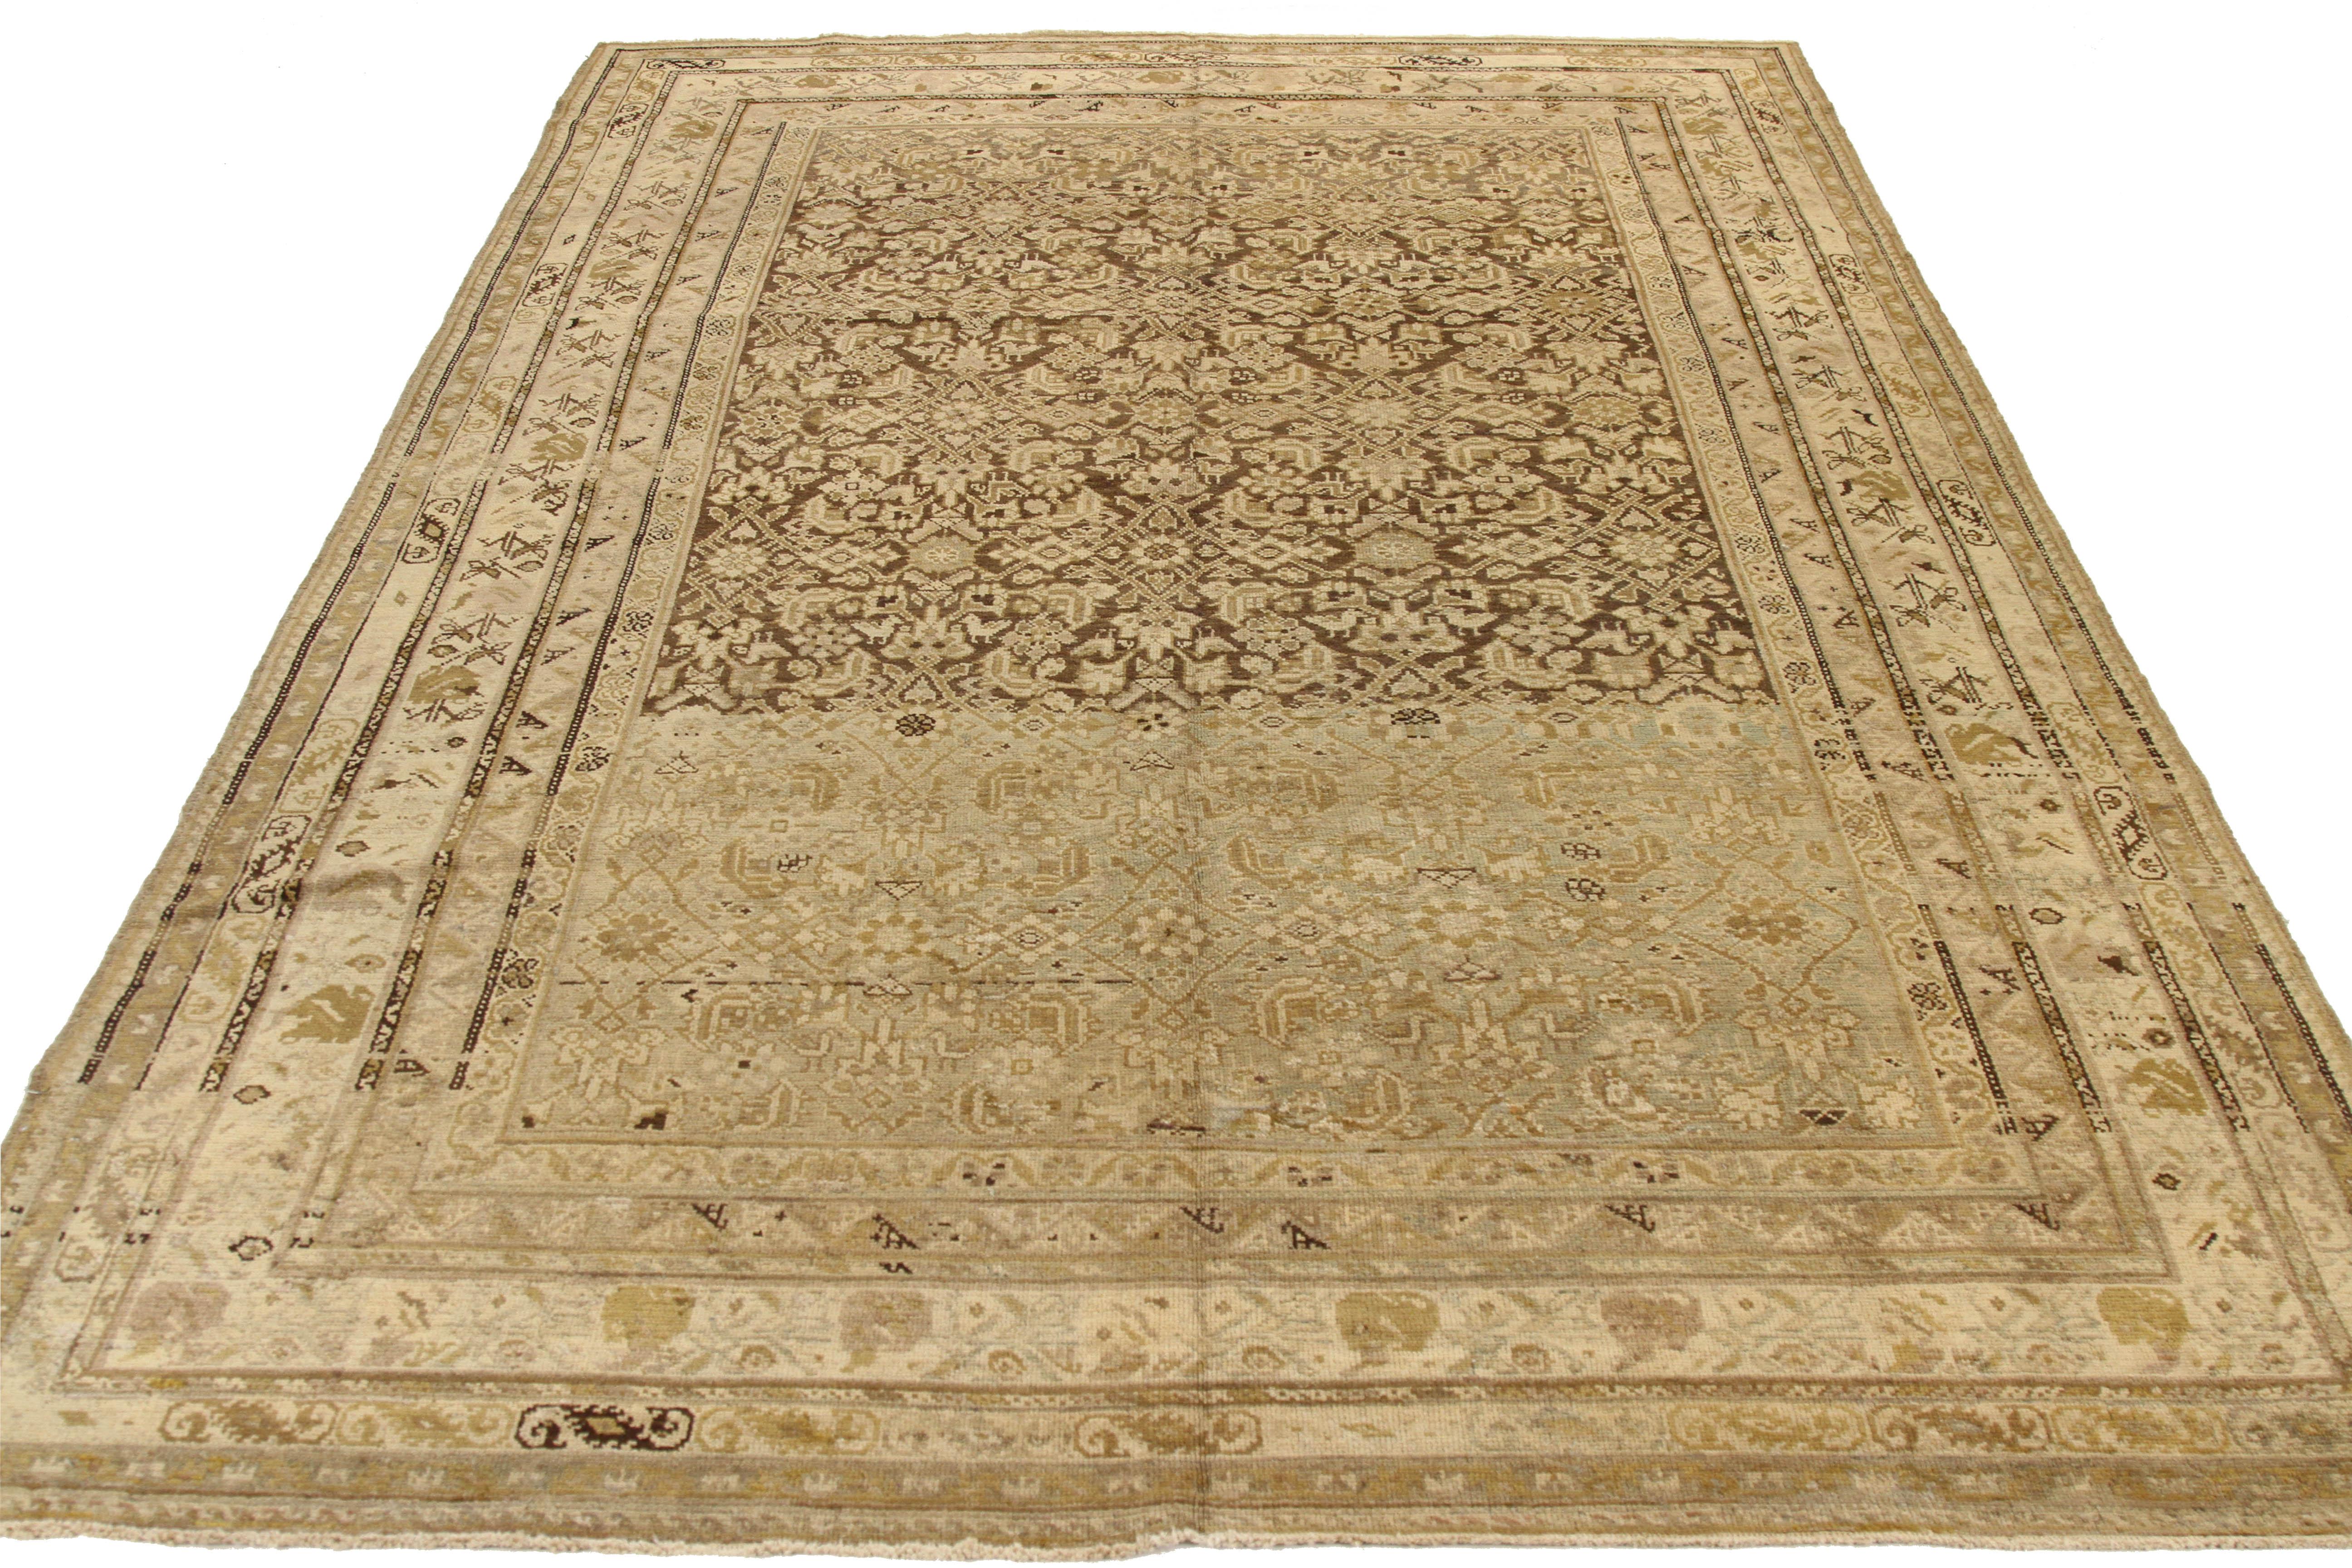 Antique Persian rug handwoven from the finest sheep’s wool and colored with all-natural vegetable dyes that are safe for humans and pets. It’s a traditional Malayer design featuring floral patterns on an ivory field. It’s a lovely piece to showcase